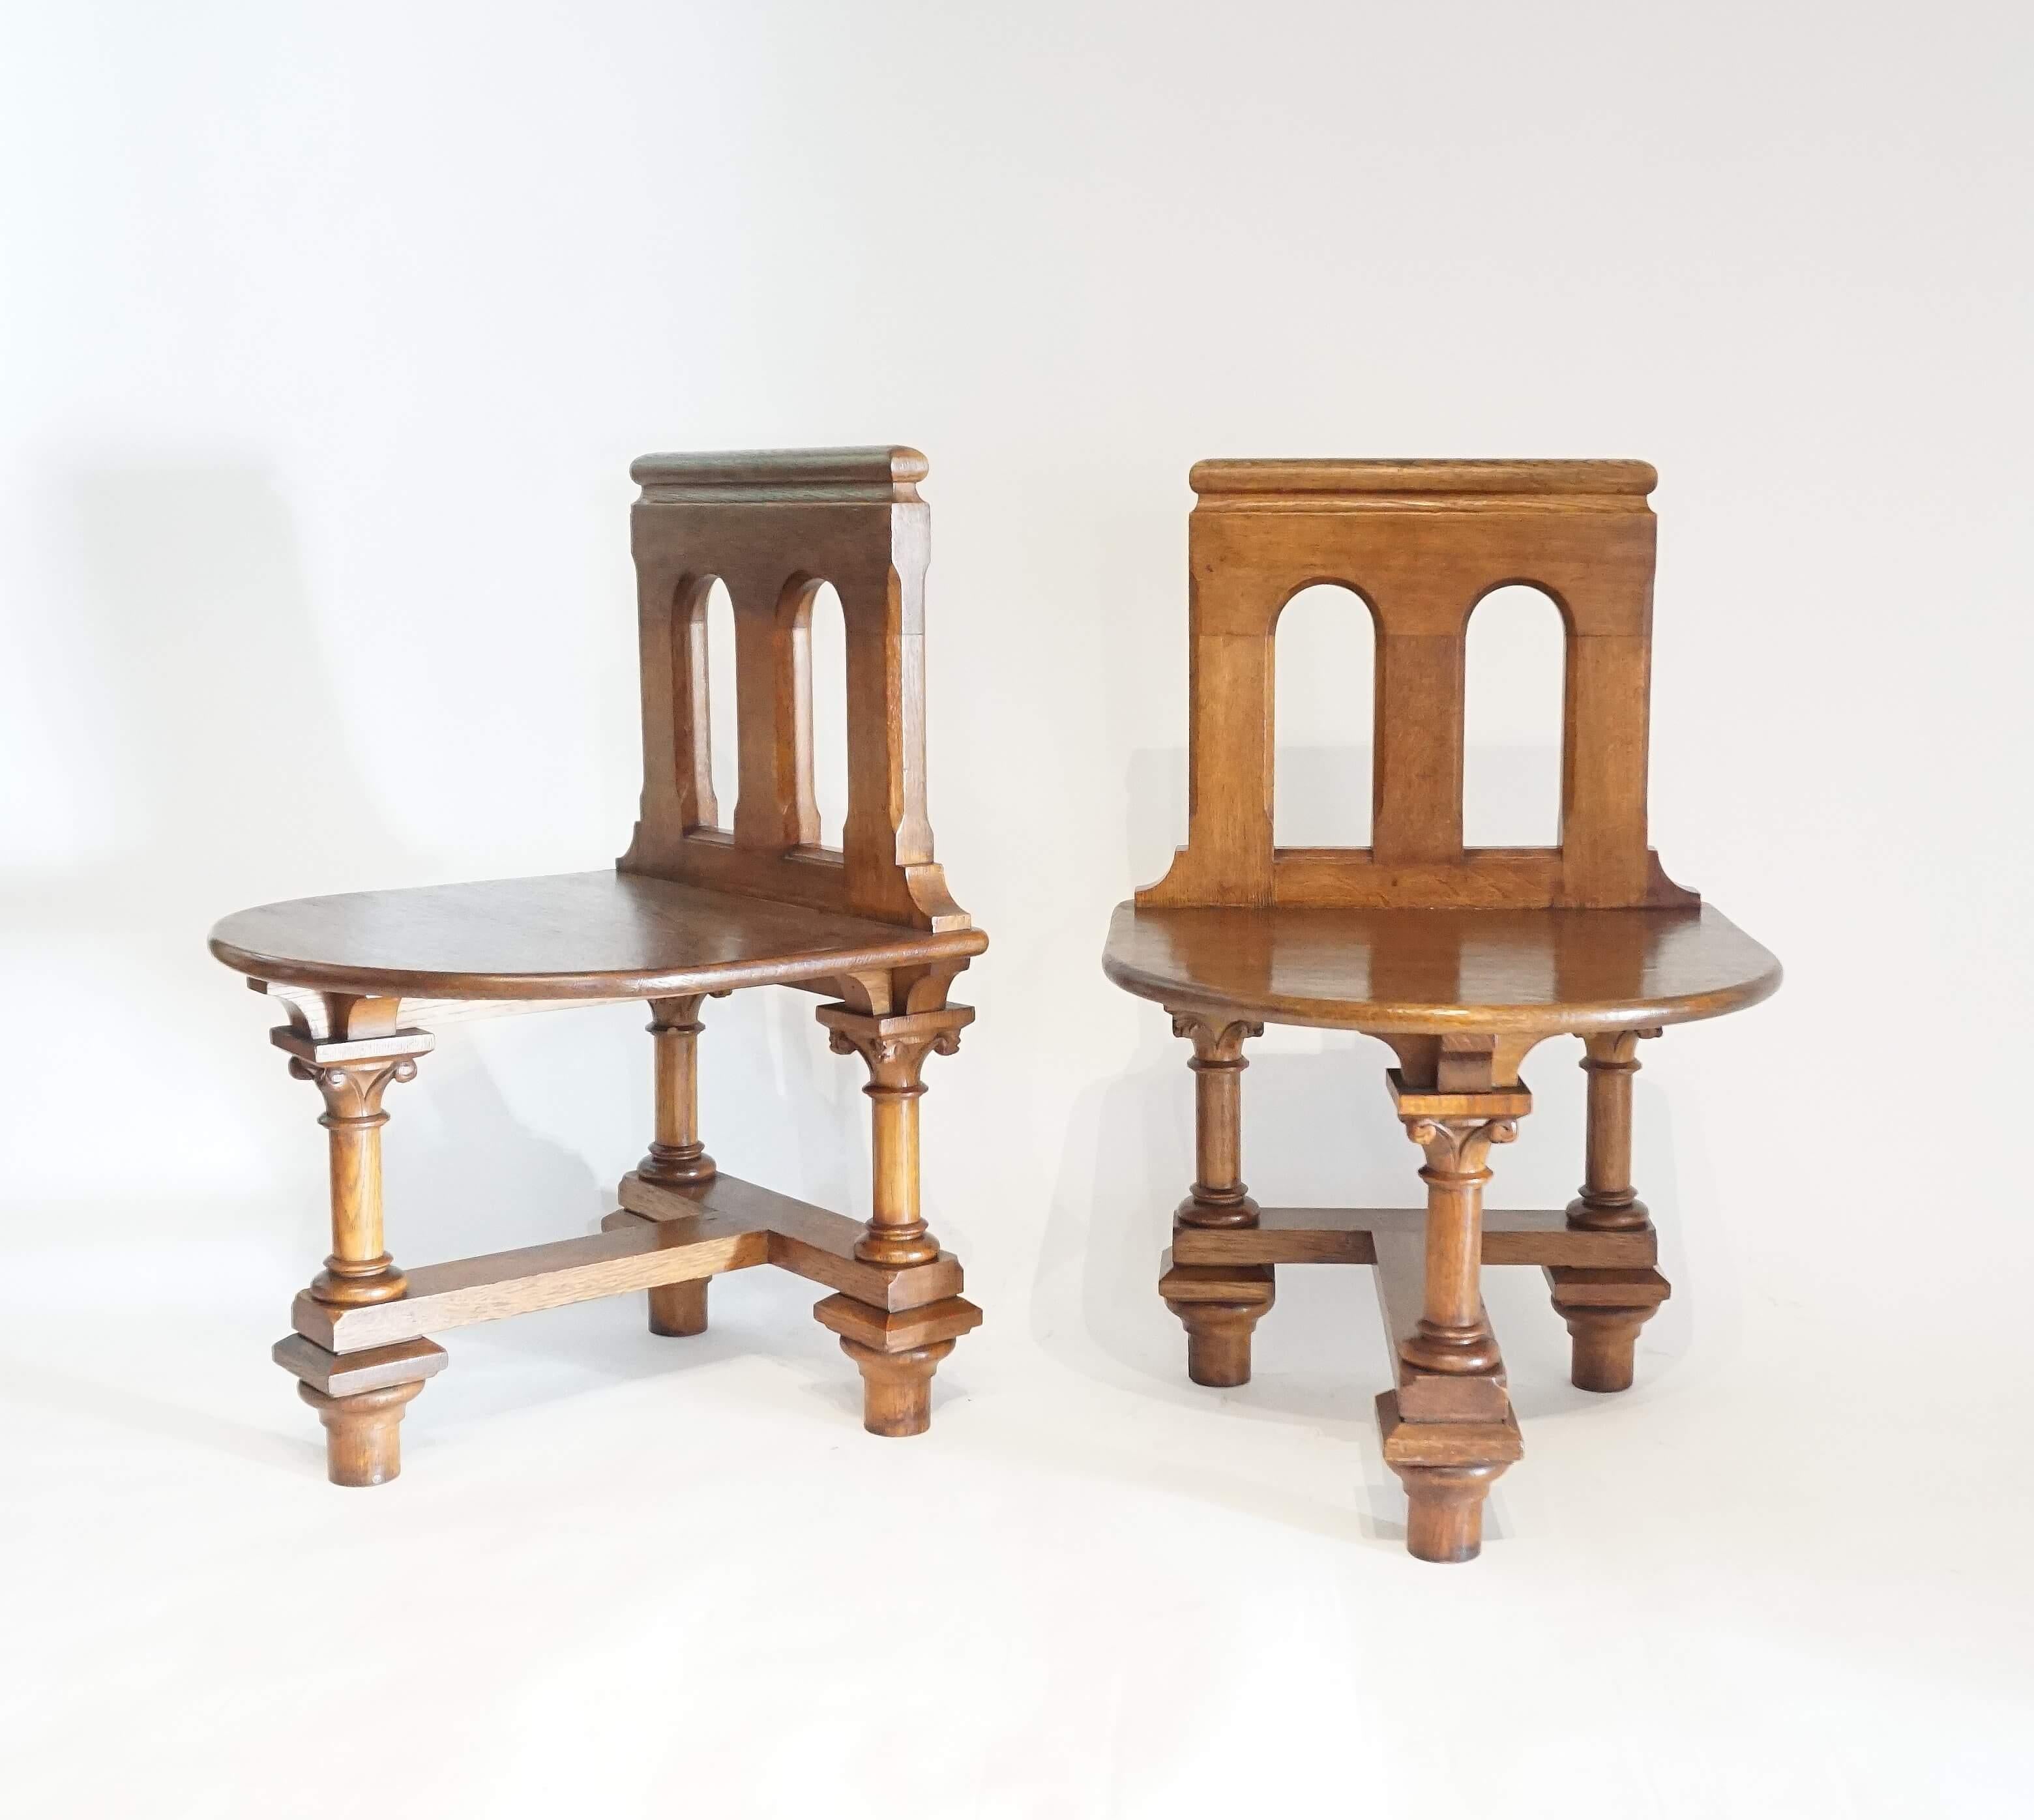 French Romanesque Revival Oak Hall Seats or Chairs, circa 1900 For Sale 5